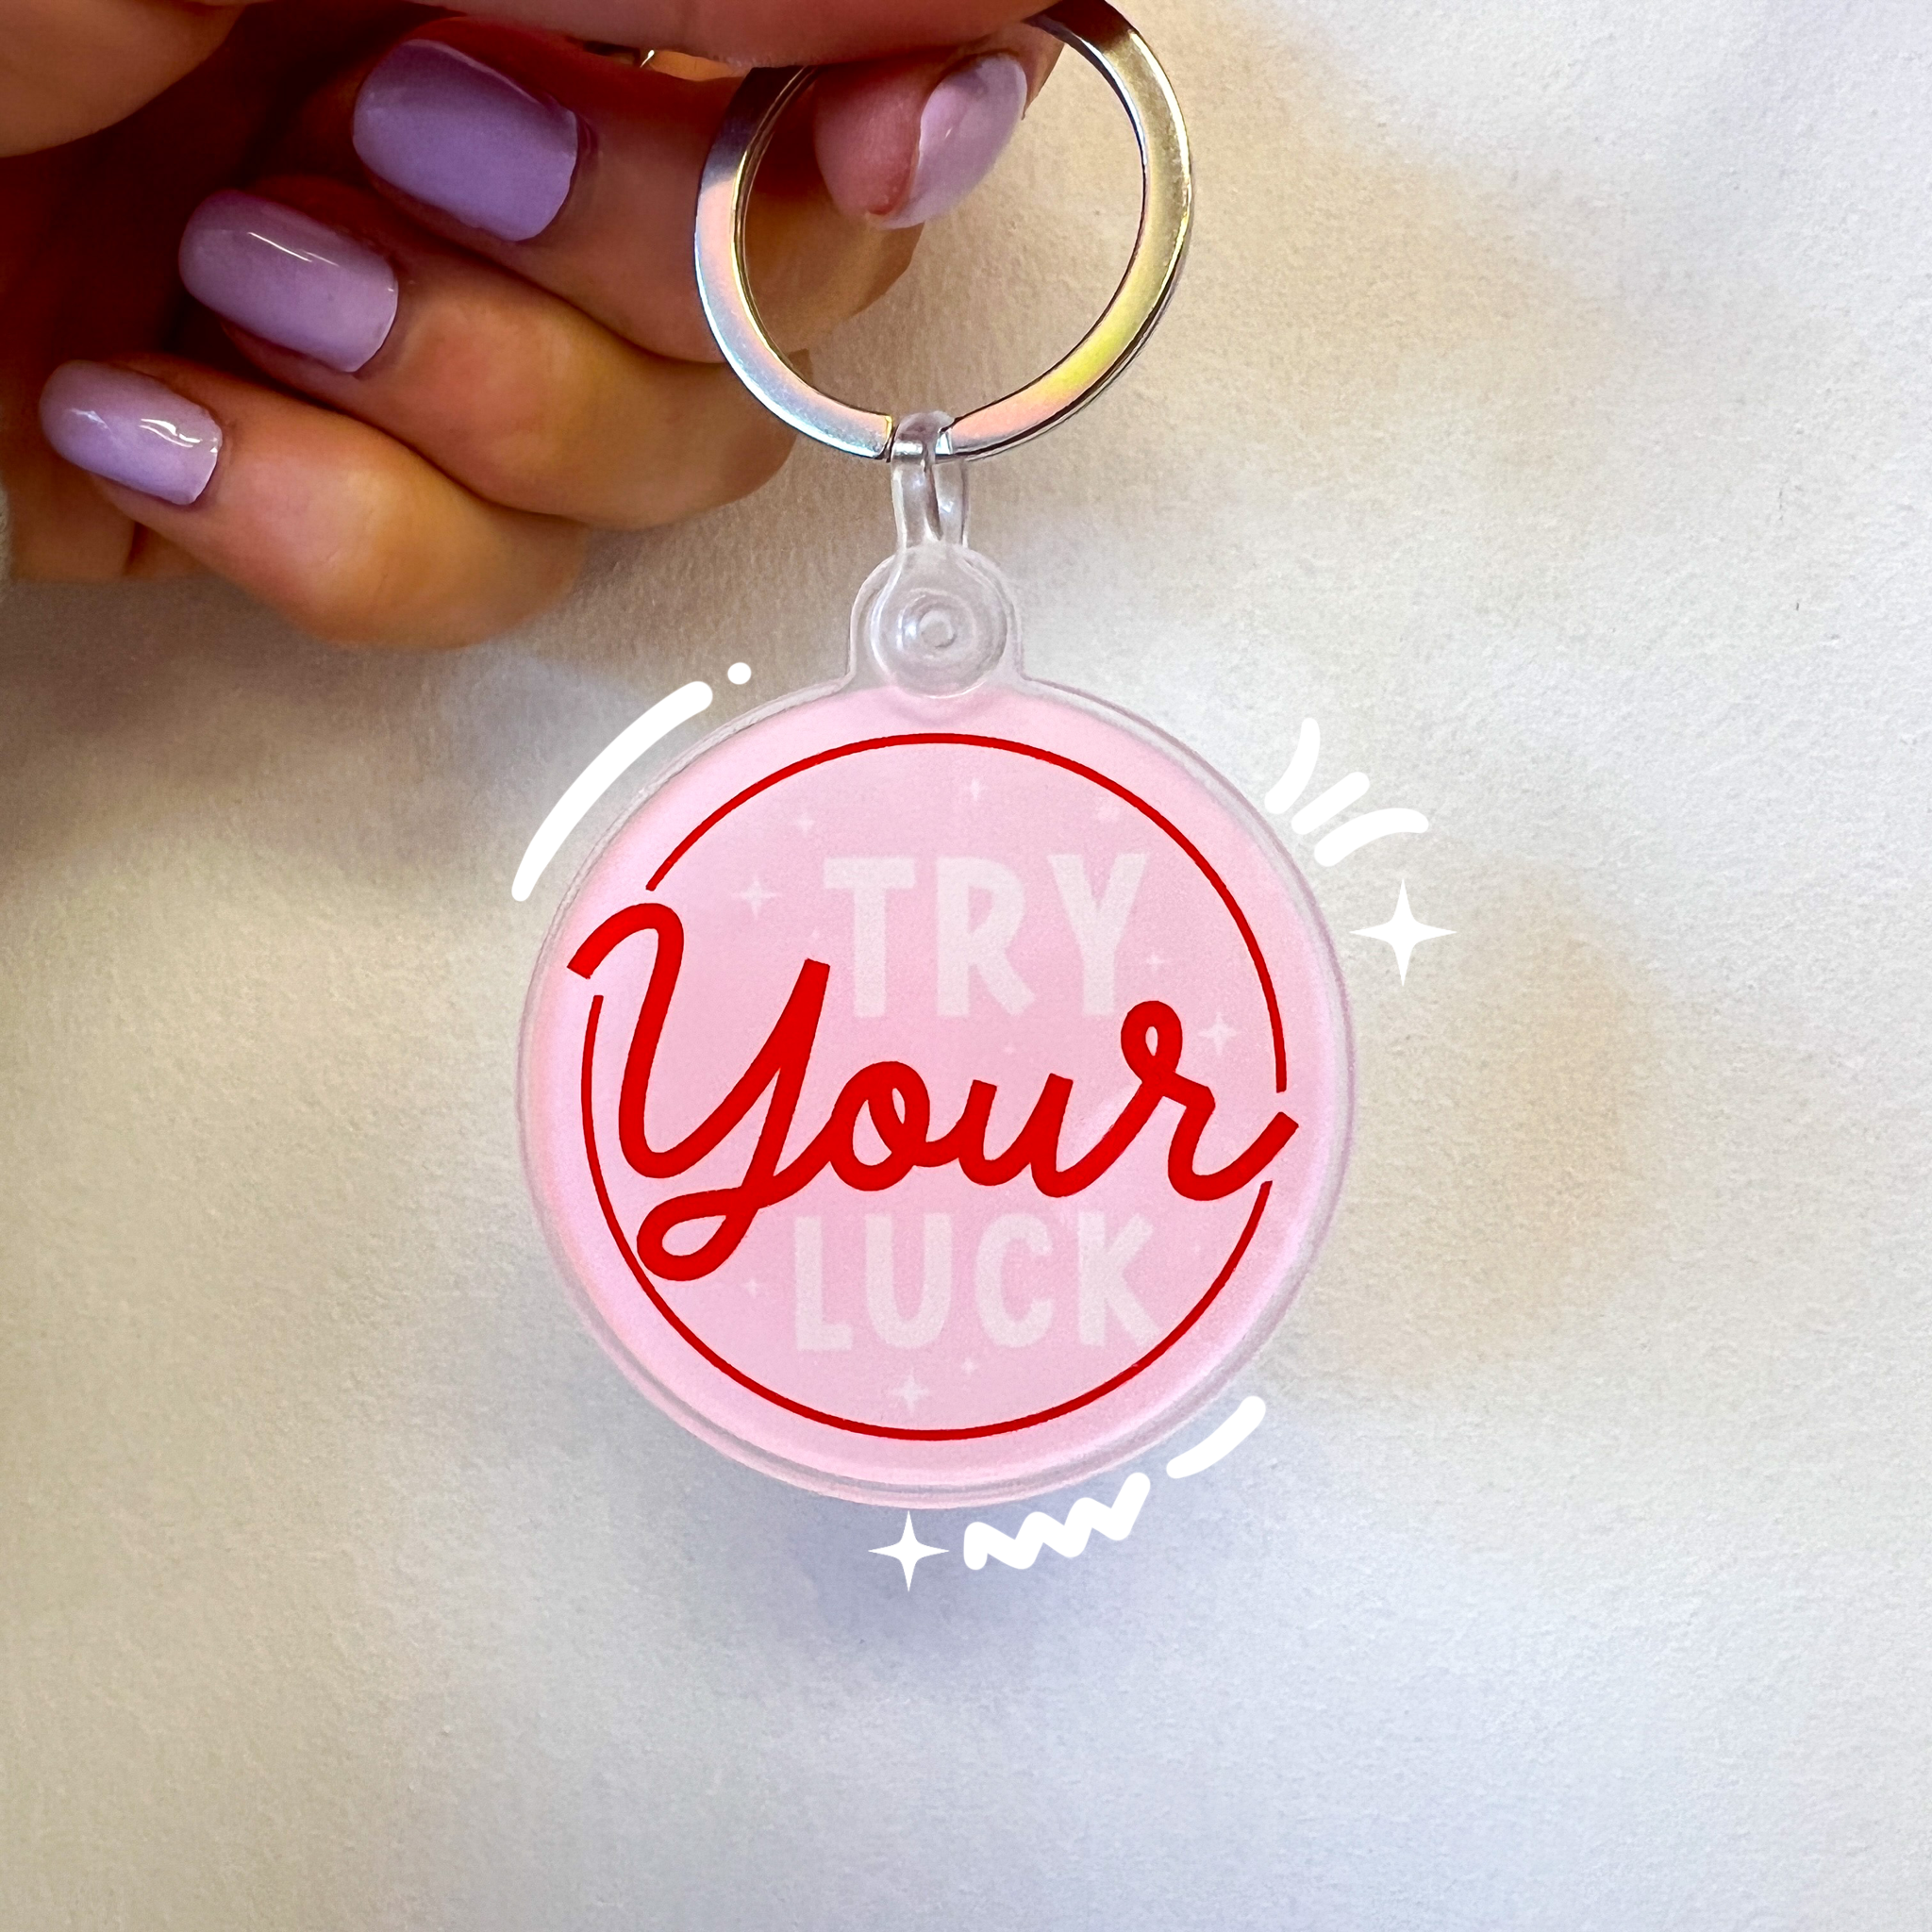 Try your luck keychain